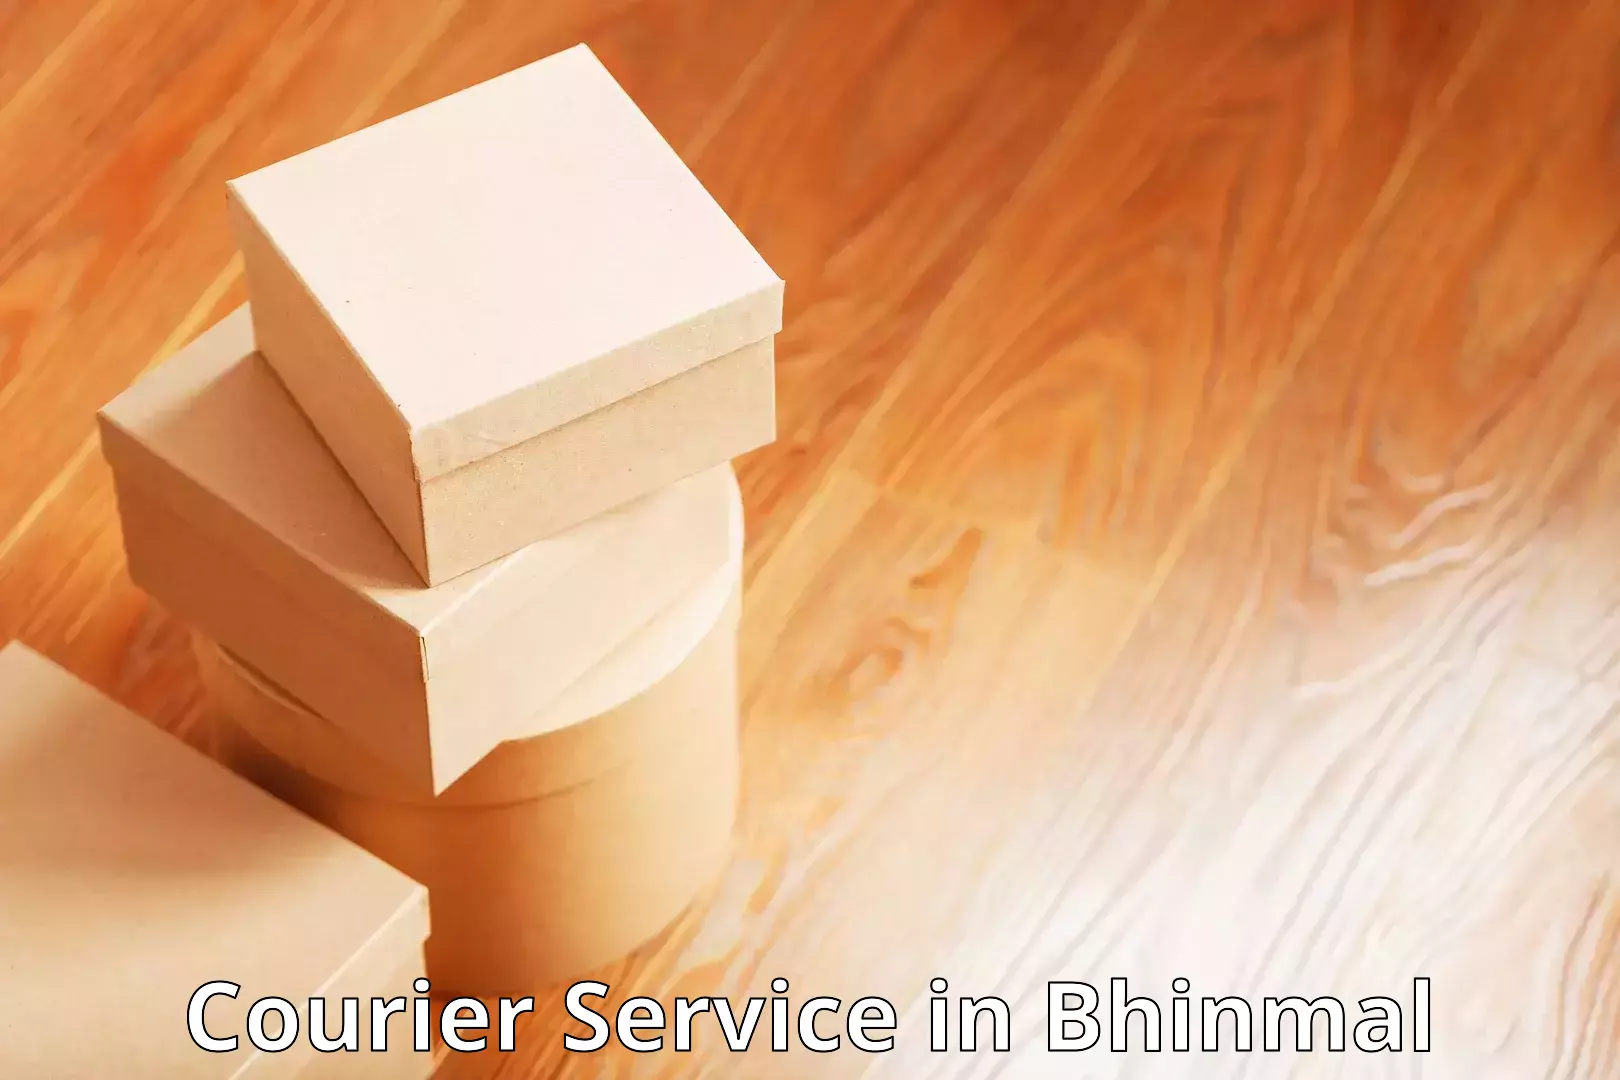 Business delivery service in Bhinmal